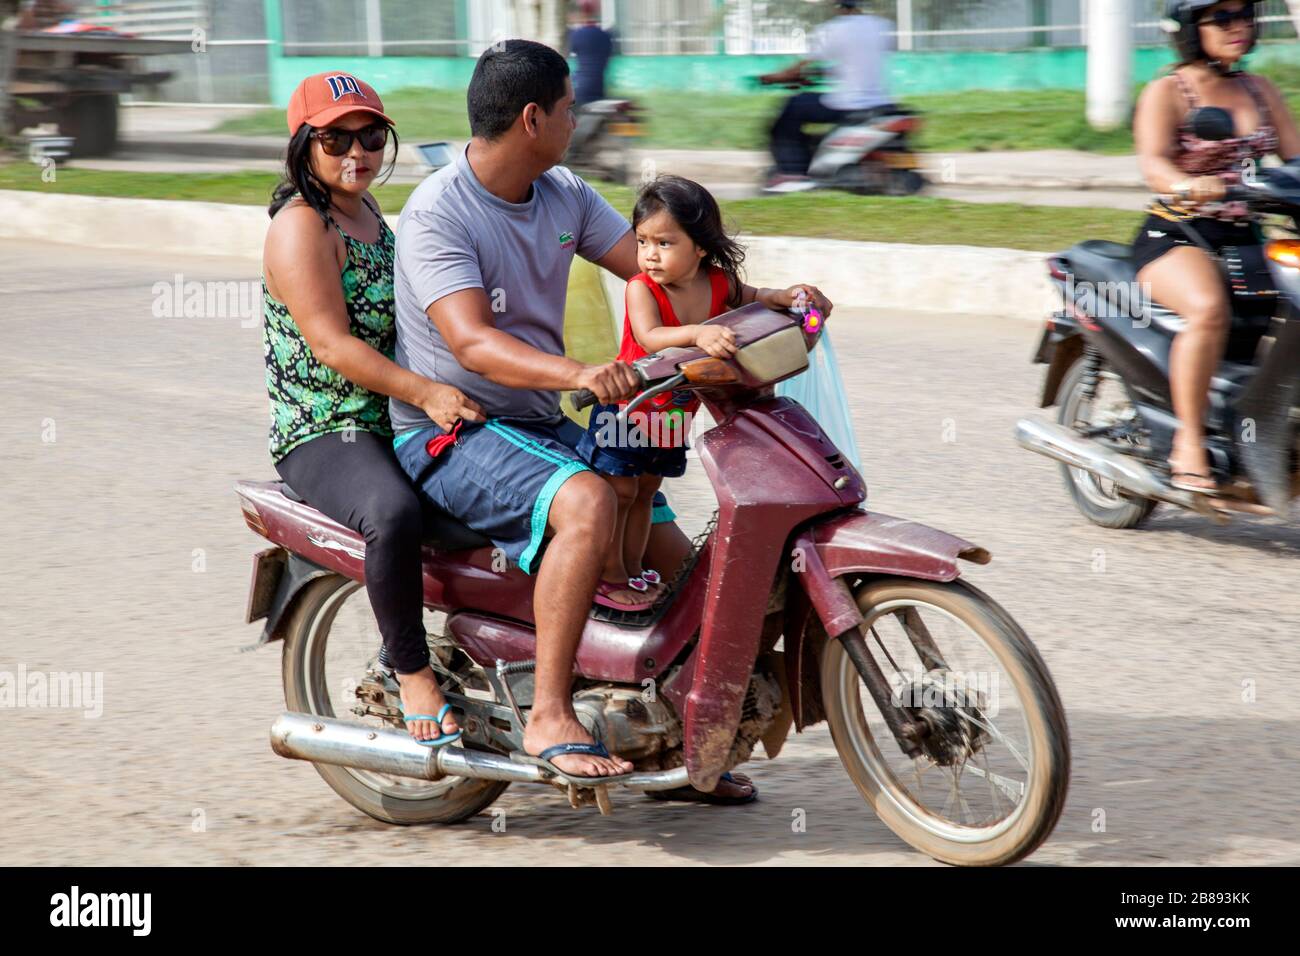 Three up, mum, dad and child on a motorbike driving without helmets, in Leticia, Amazon, Colombia, South America. Stock Photo